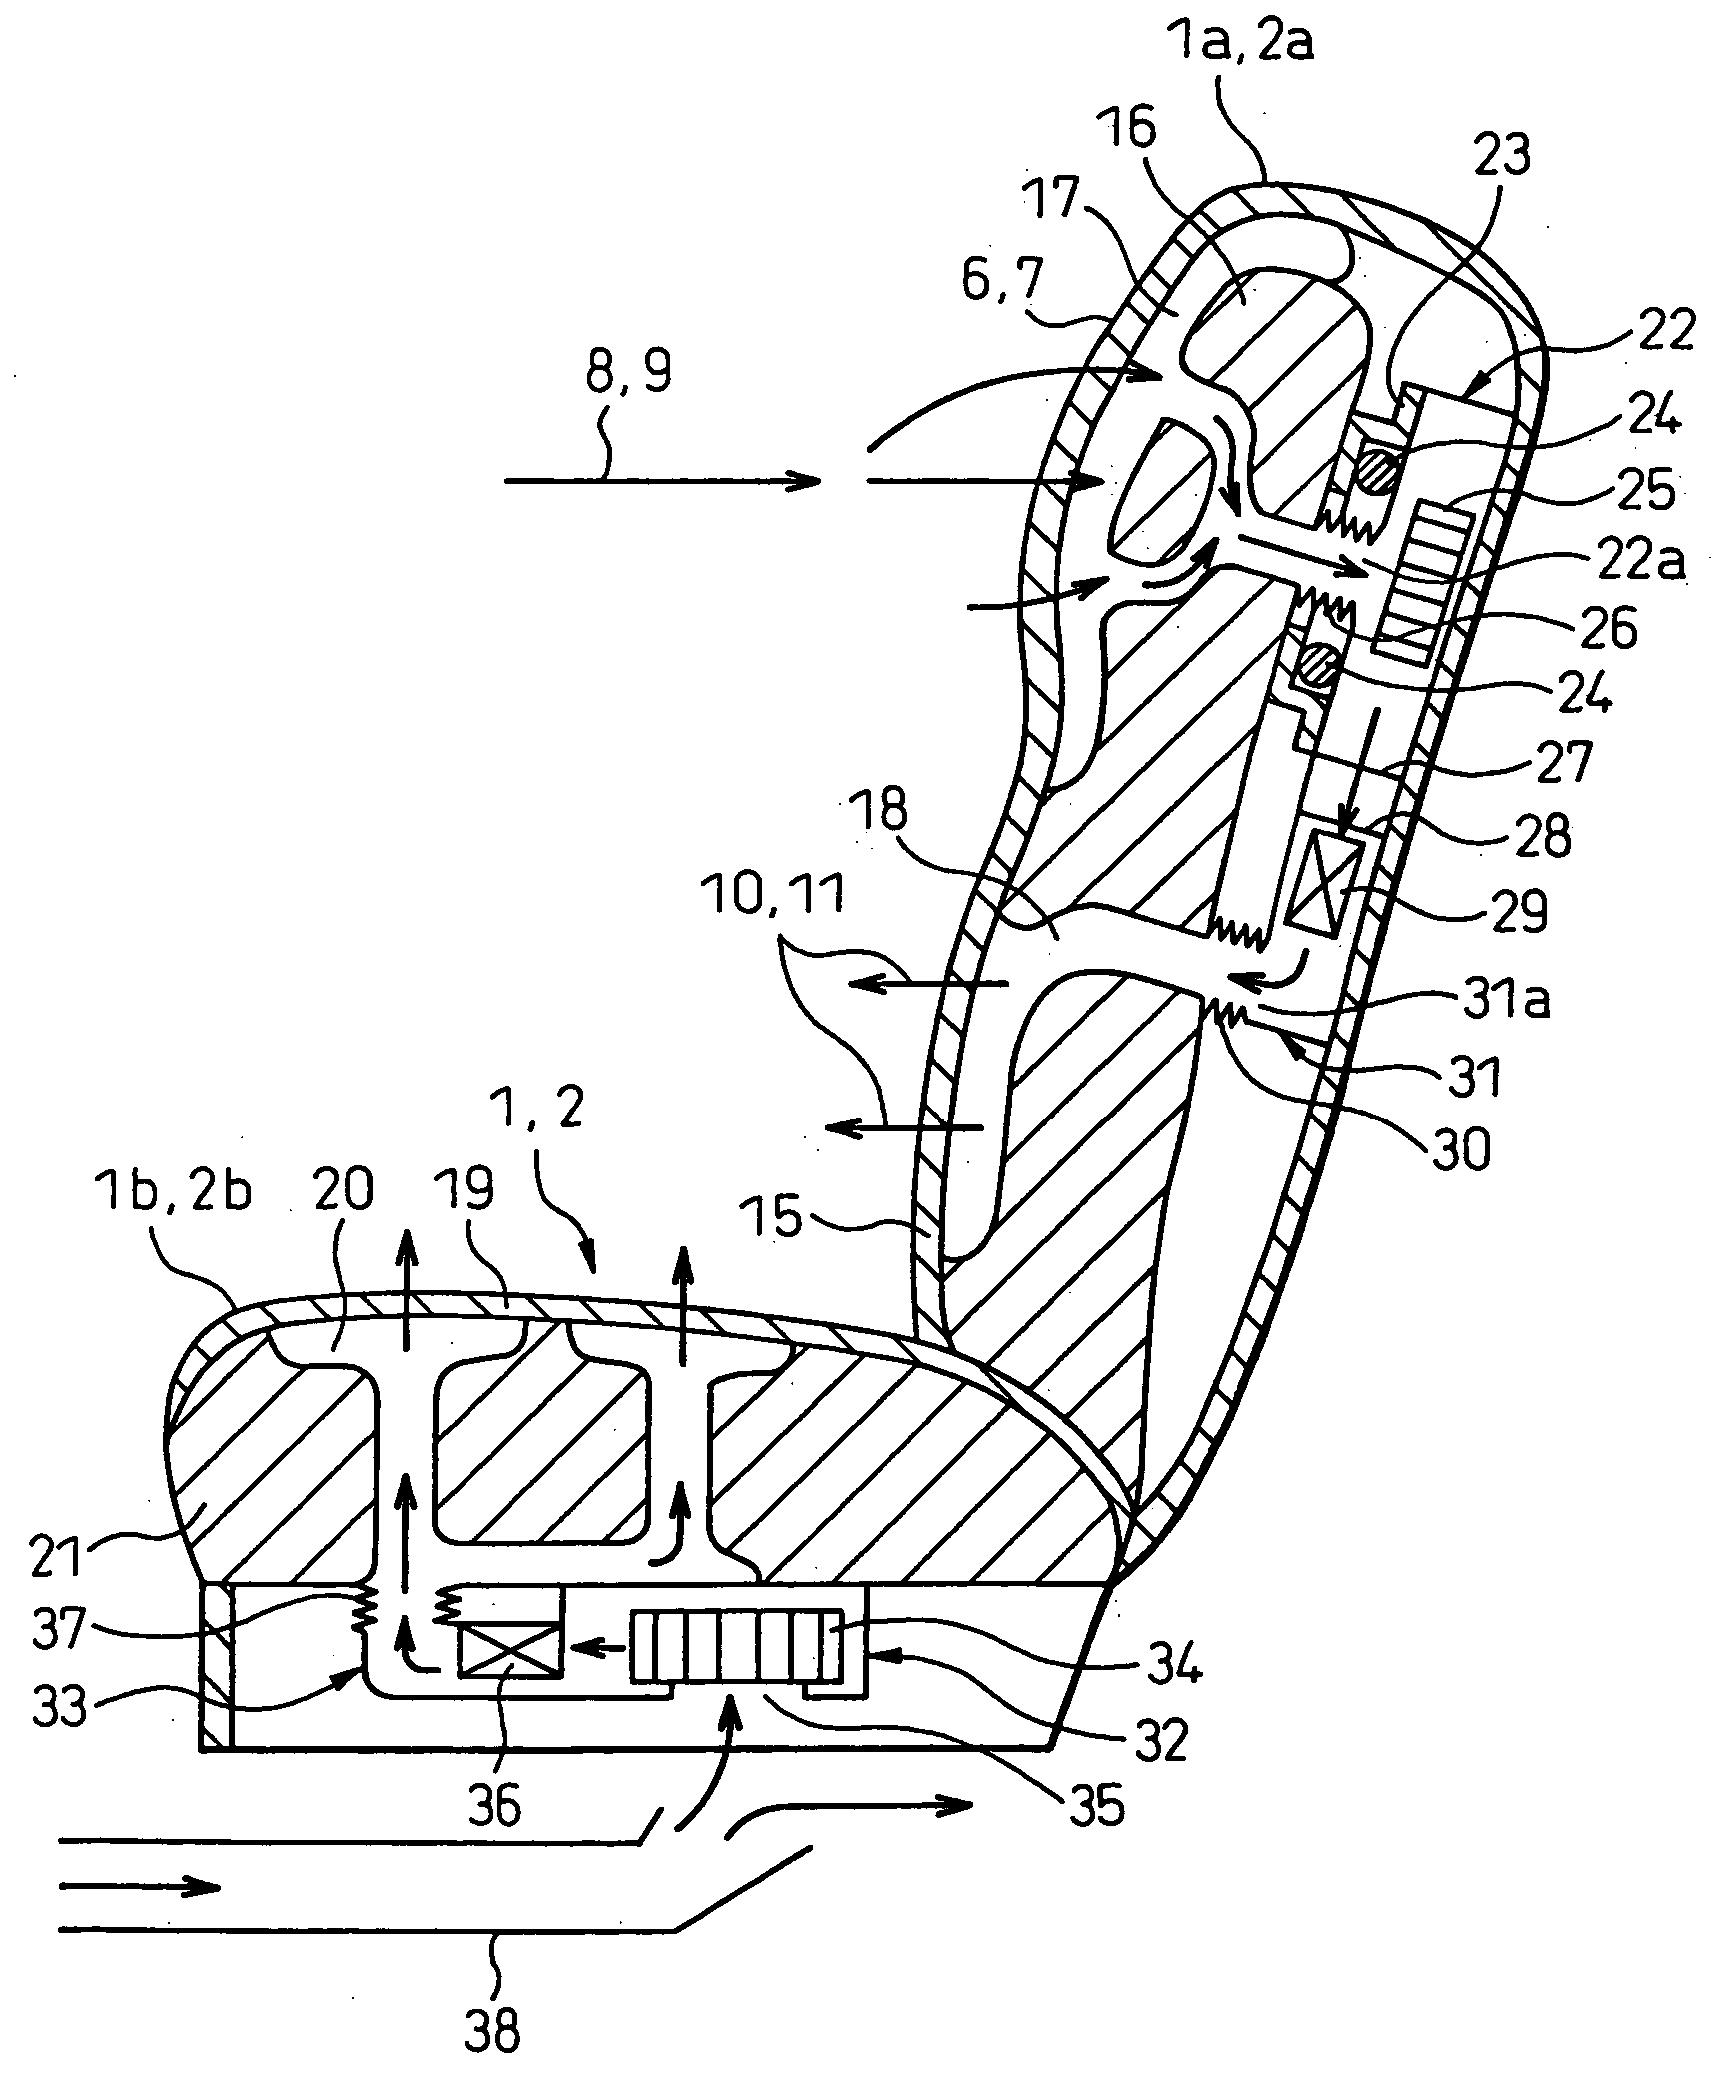 Automotive seat air-conditioning system